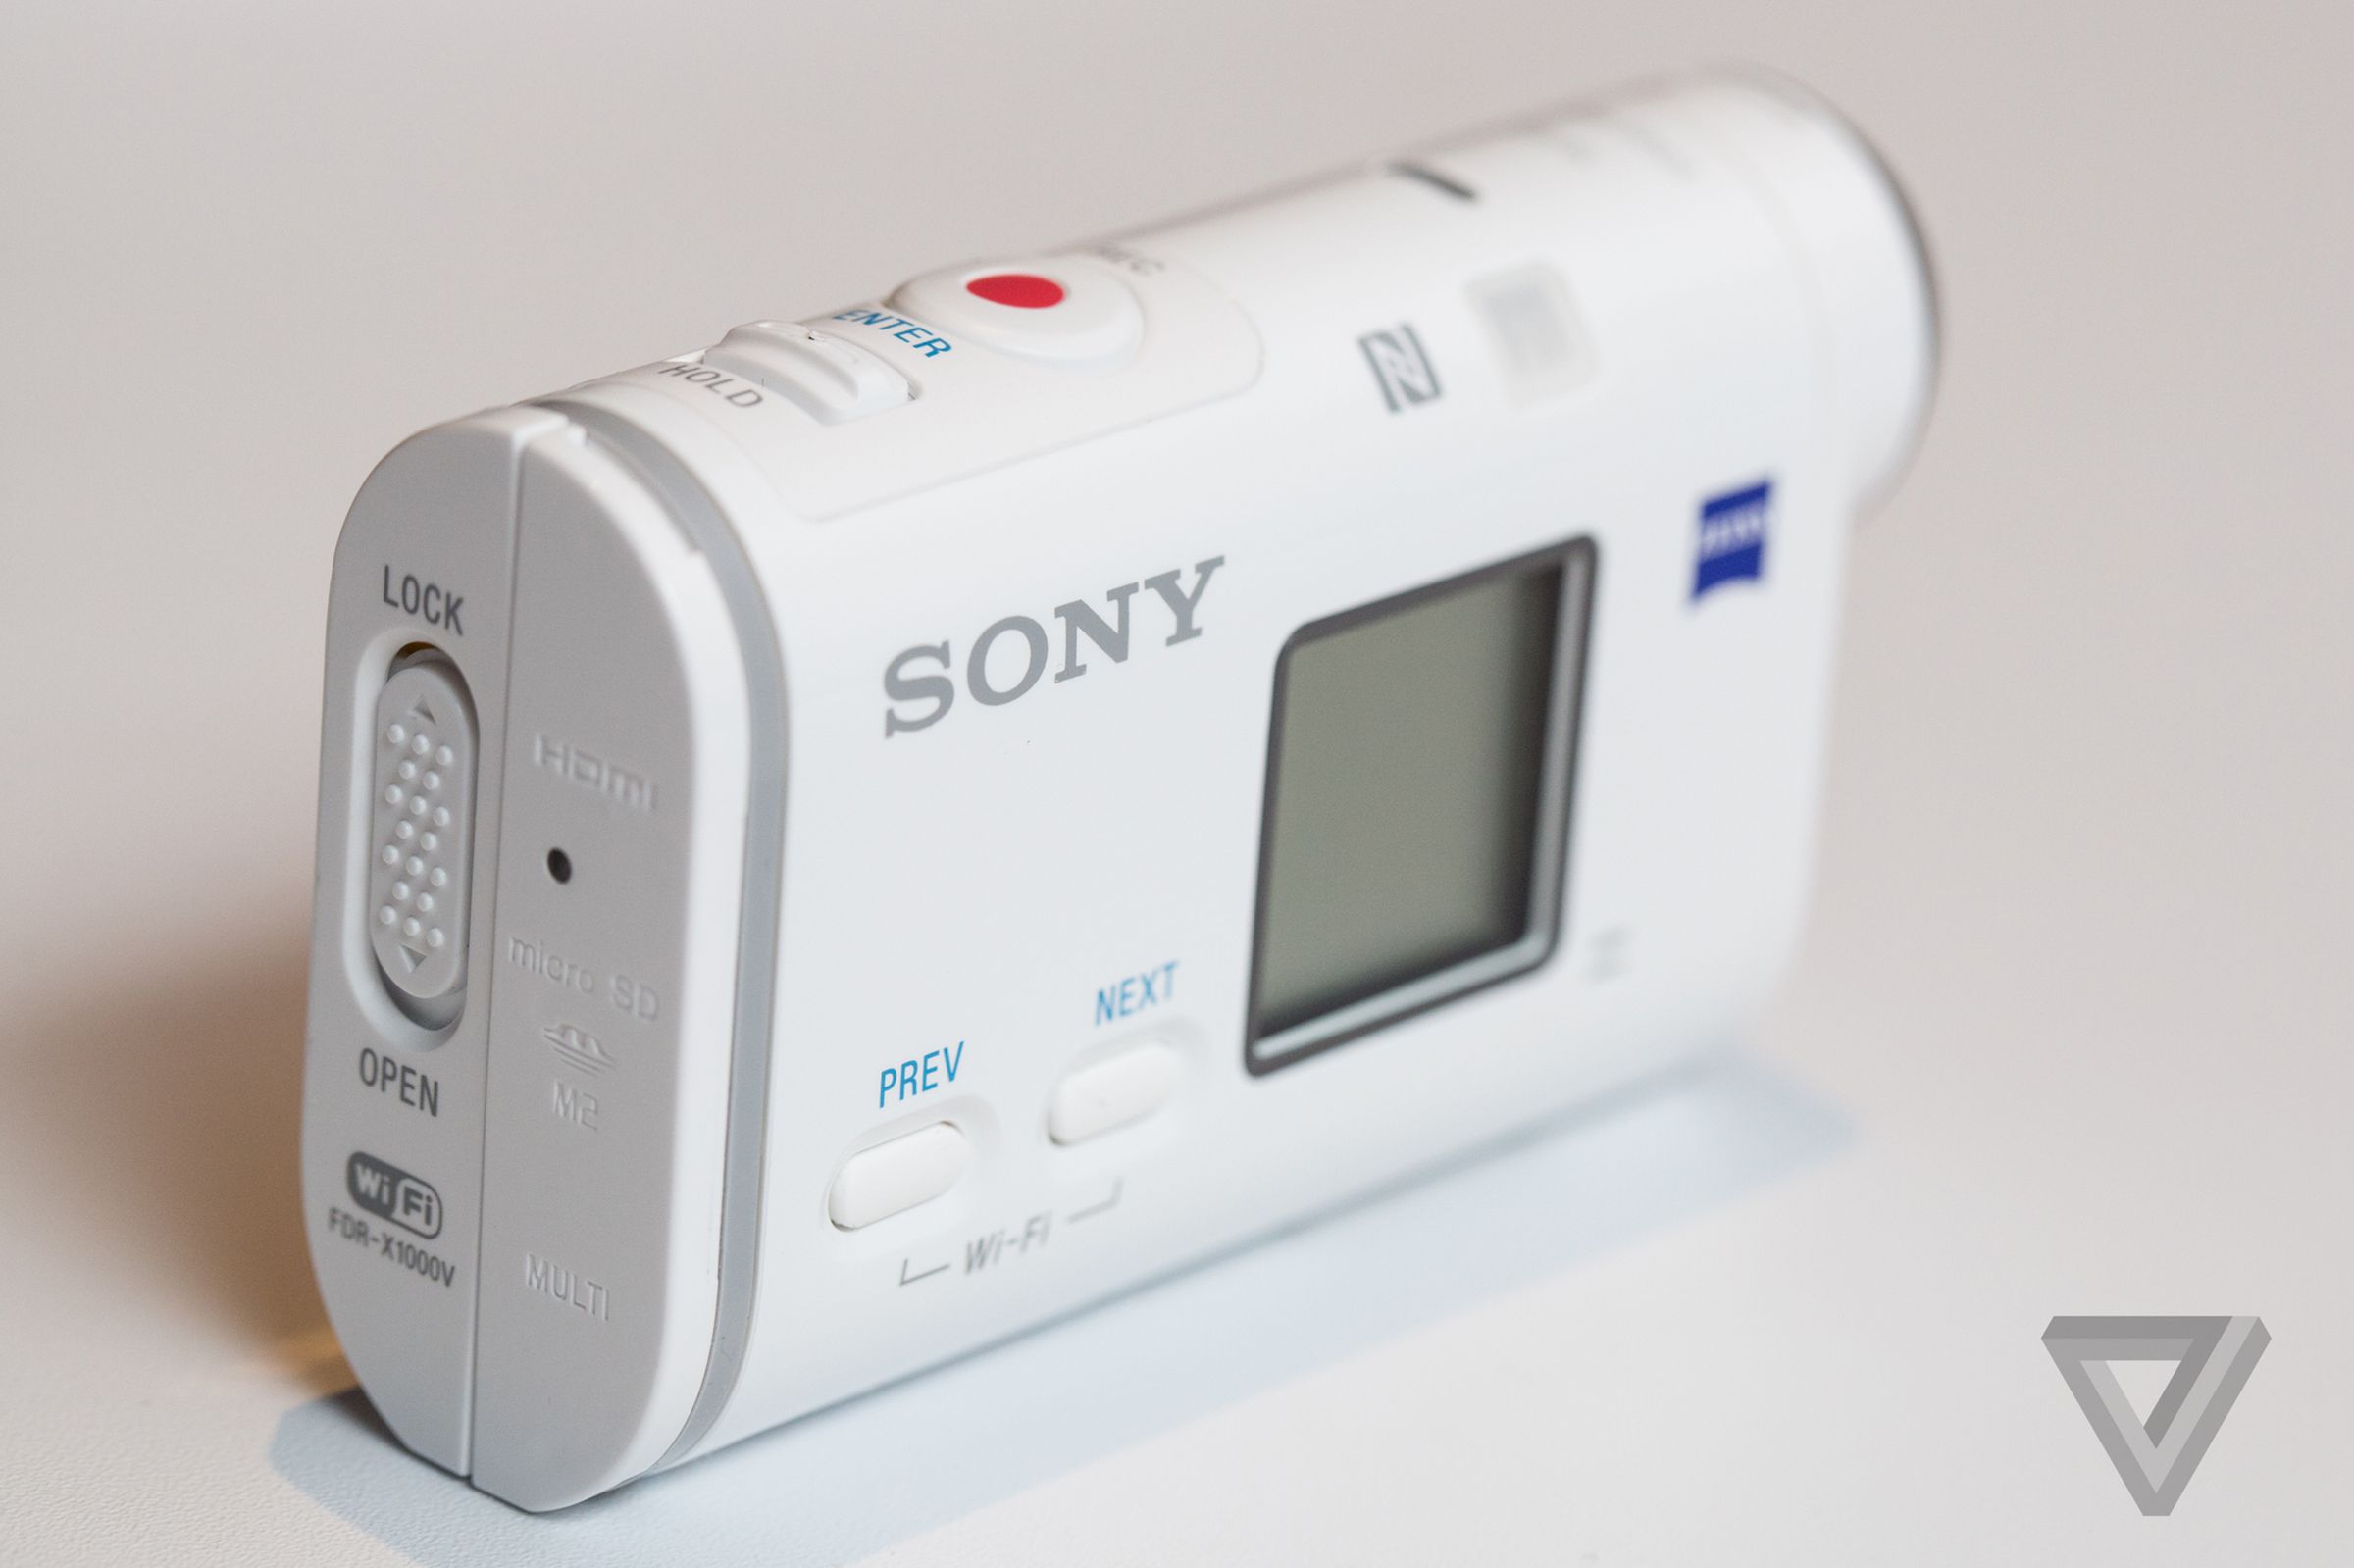 Sony Action Cam AS1000V hands on photos